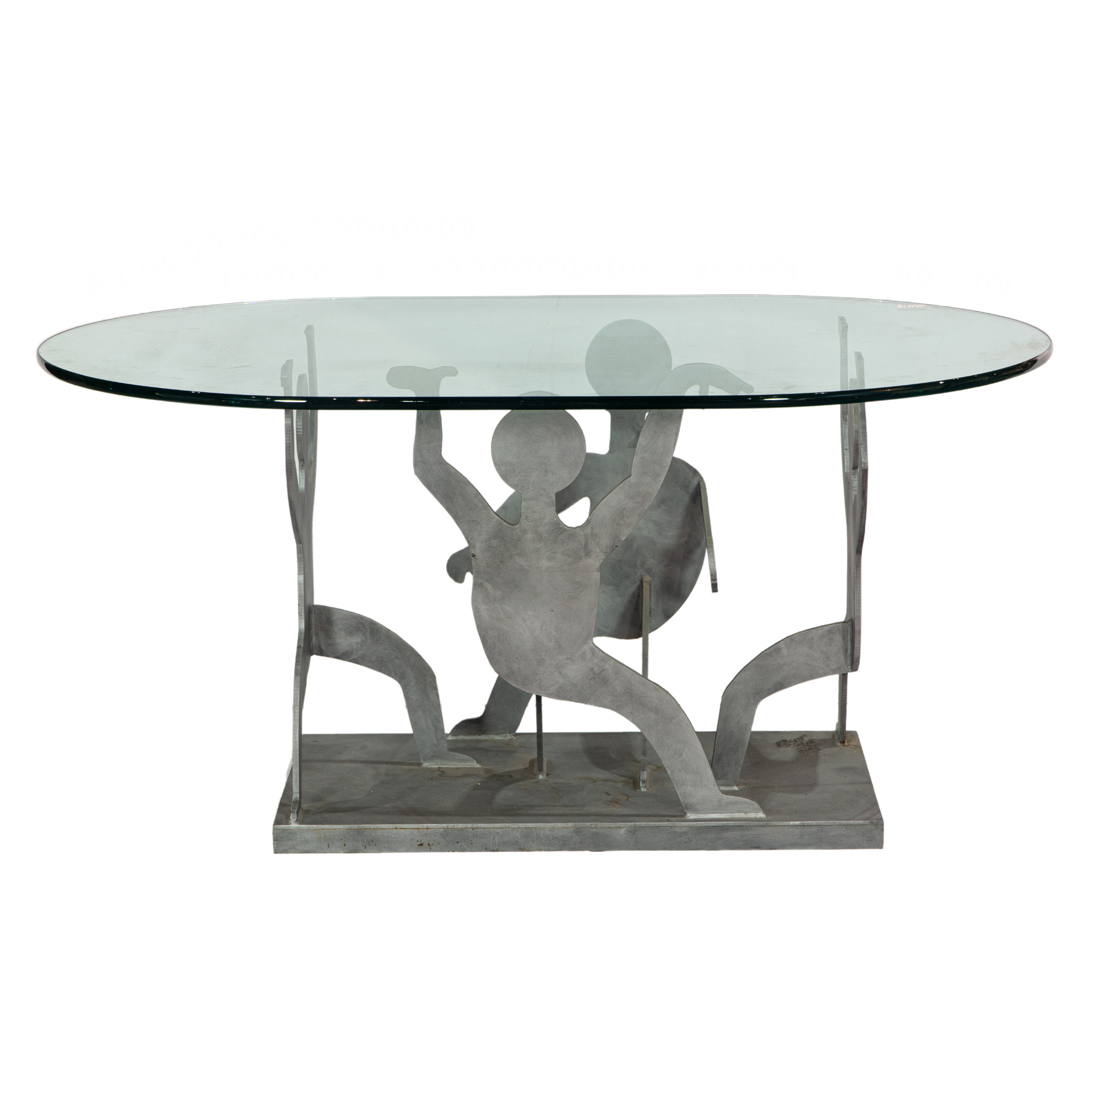 CONTEMPORARY DINING TABLE Contemporary